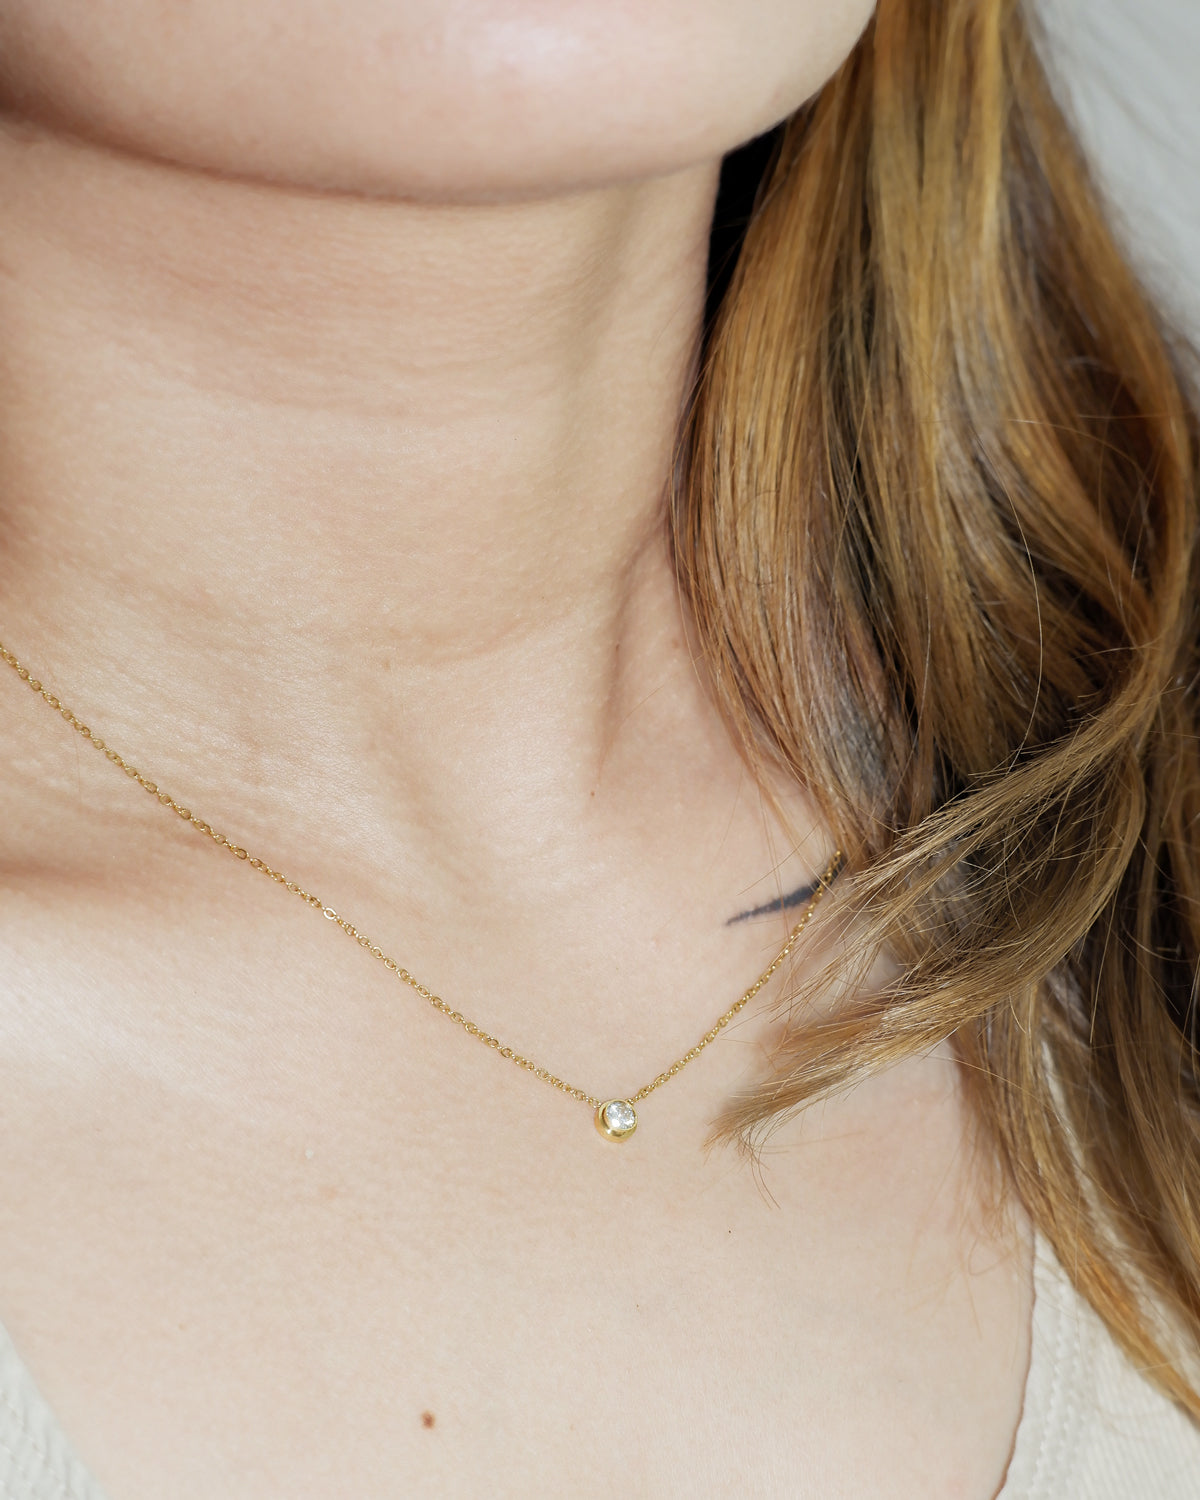 The Classic Solitaire Necklace